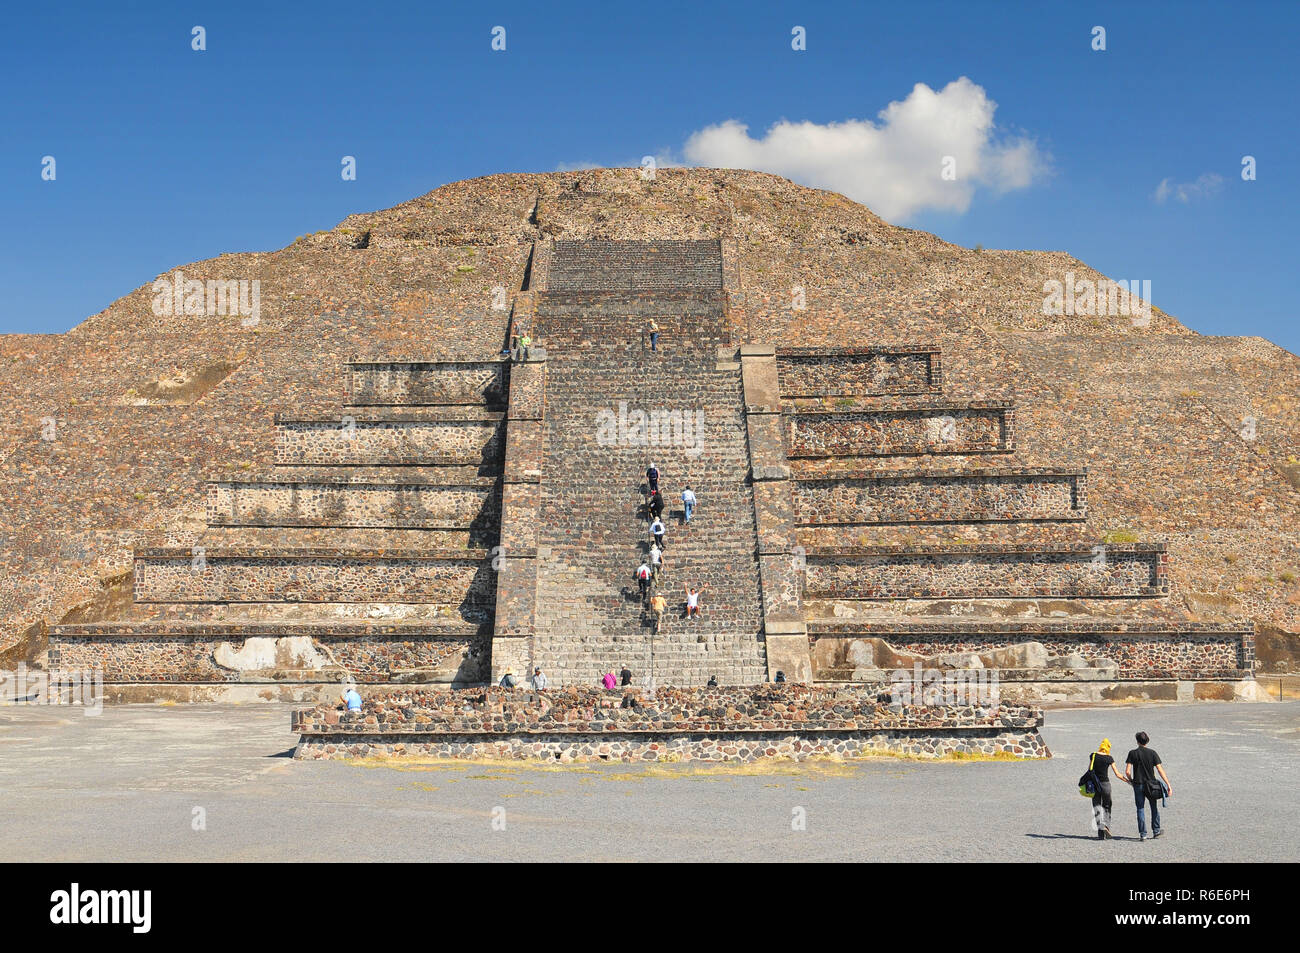 View Of Moon Pyramids In Ancient City Teotihuacan, Mexico Stock Photo